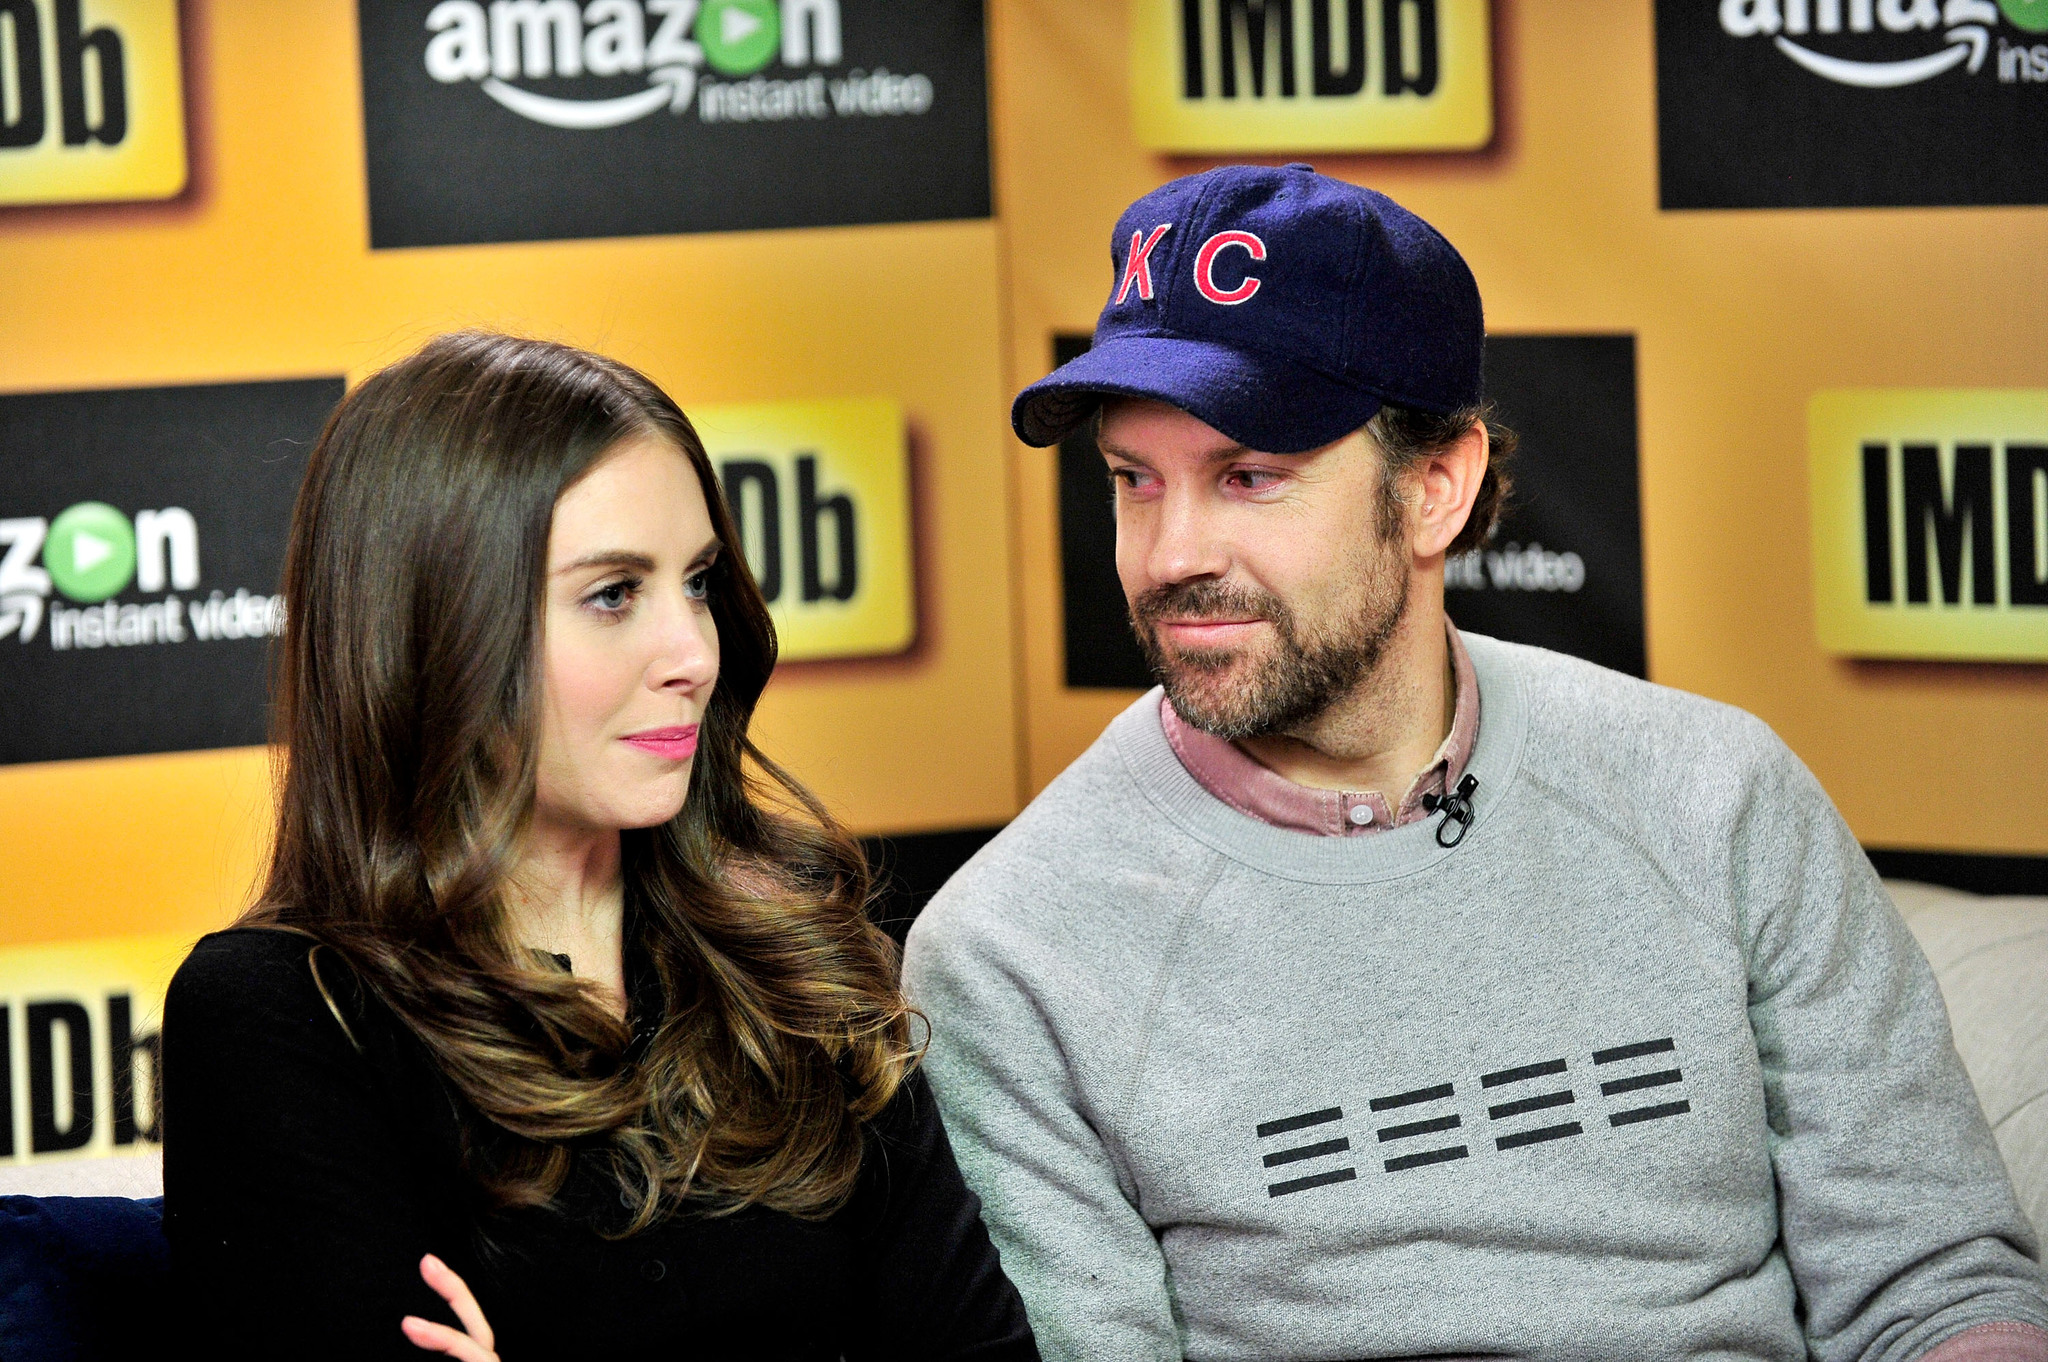 Jason Sudeikis and Alison Brie at event of The IMDb Studio (2015)